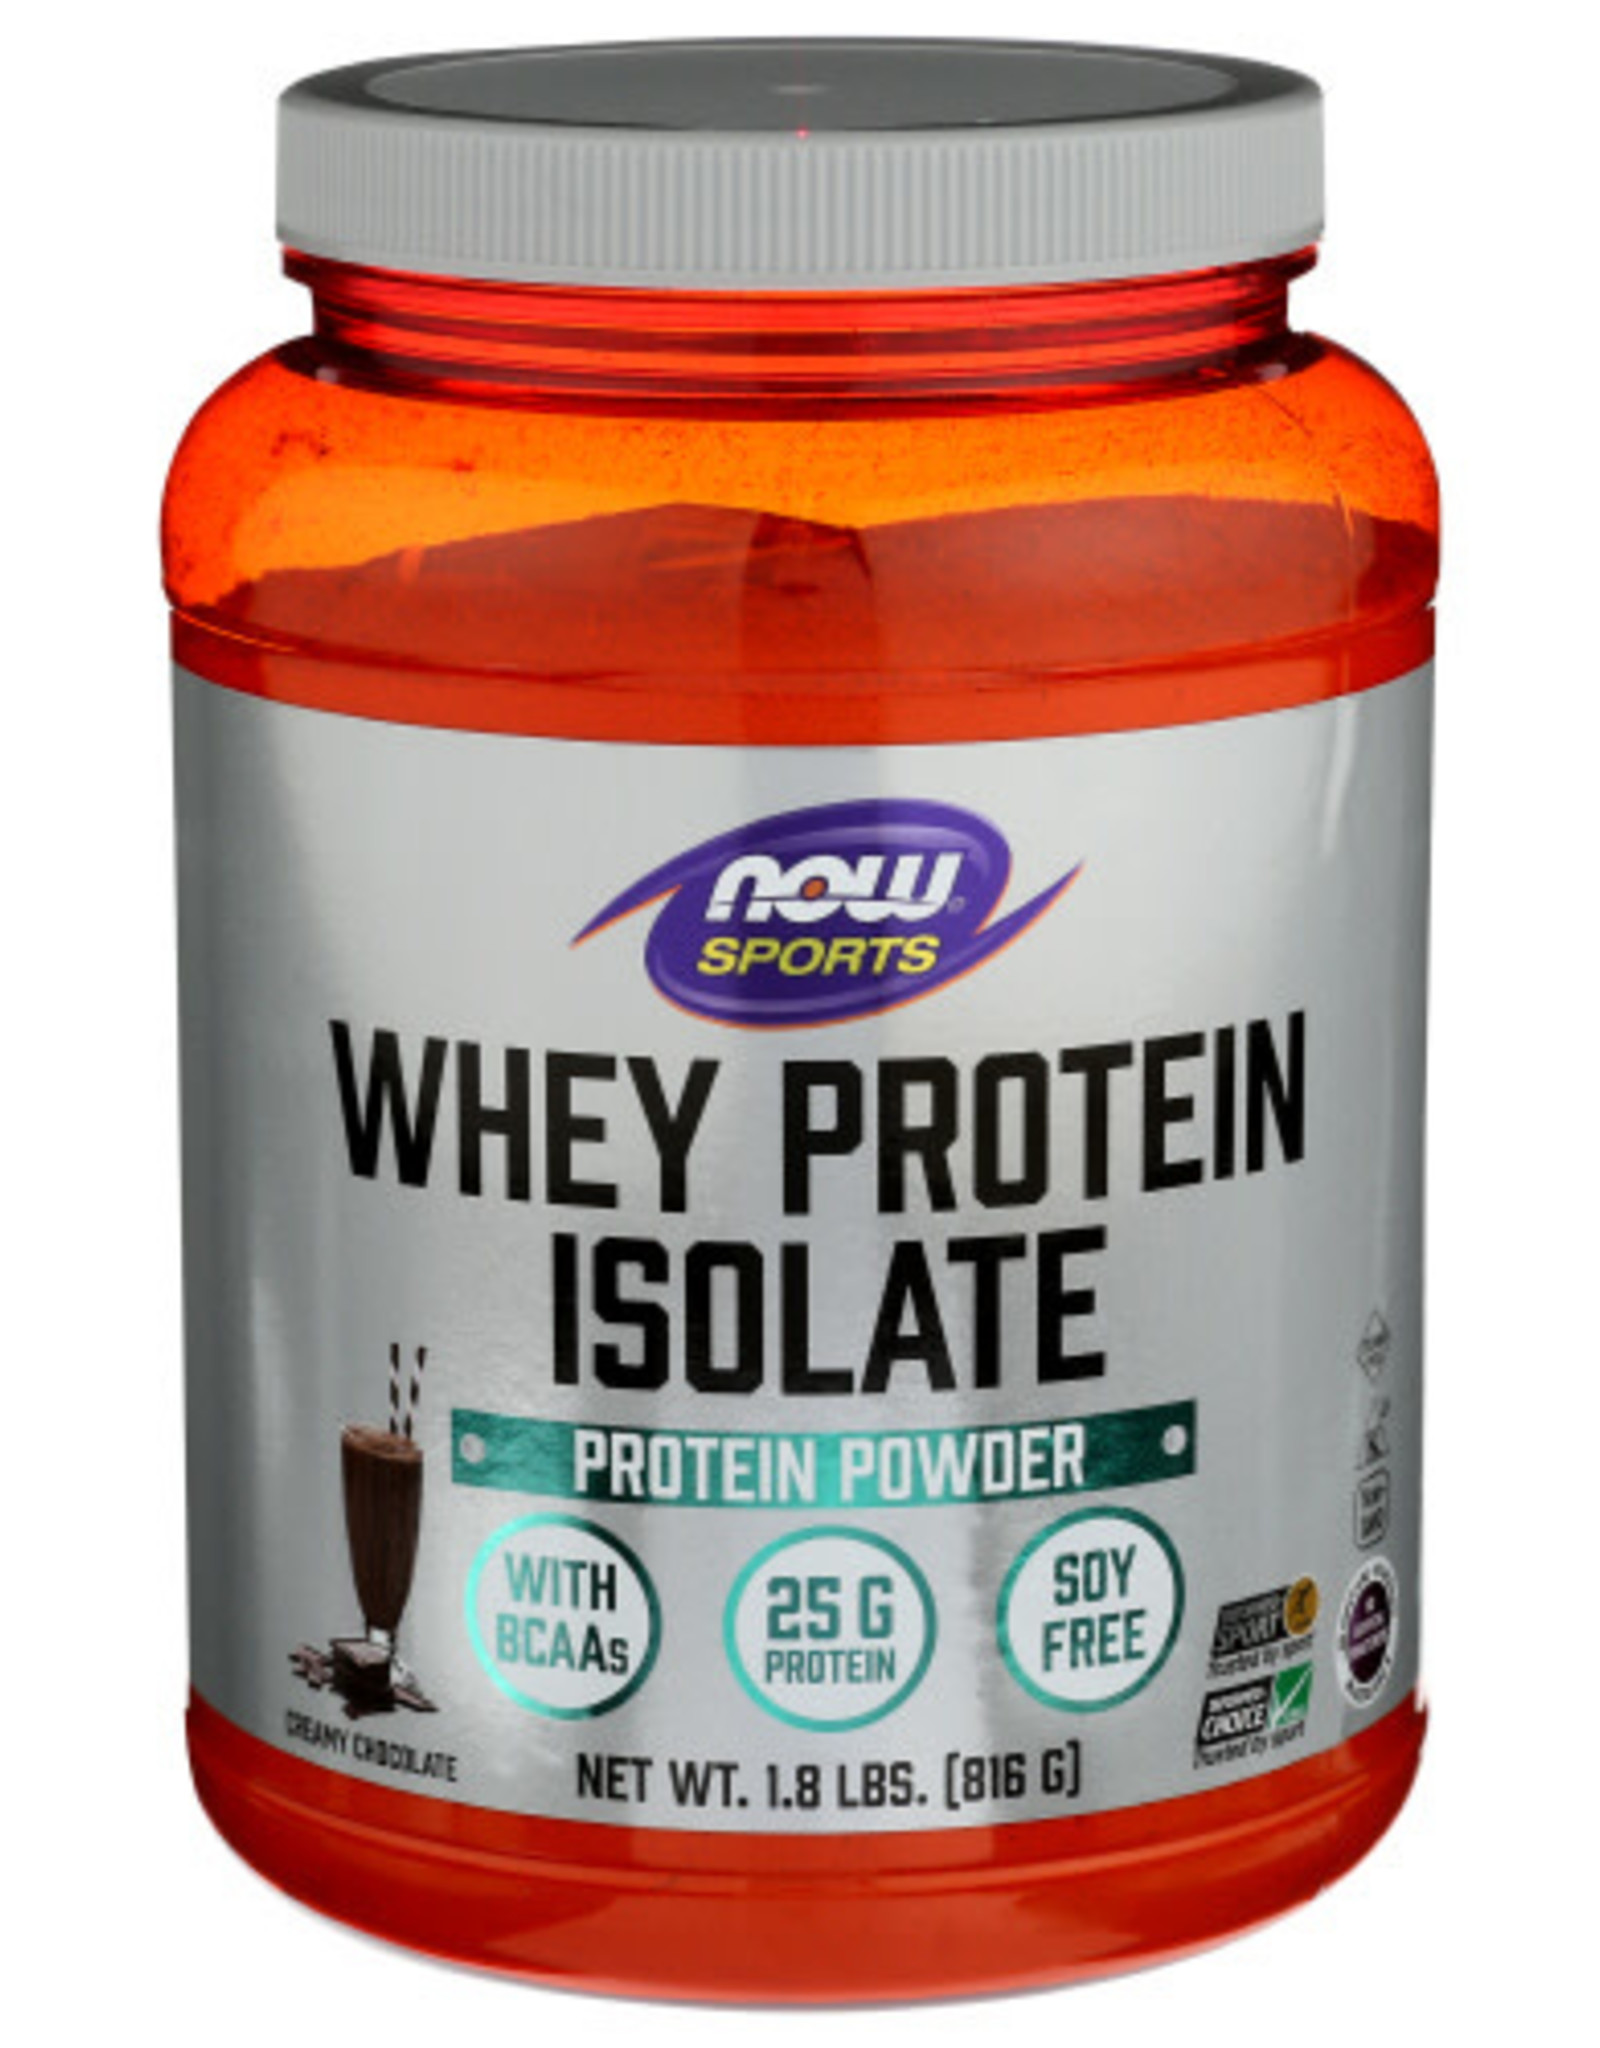 NOW SPORTS® Now Sports Protein Isolate Chocolate Protein Powder 1.8lbs